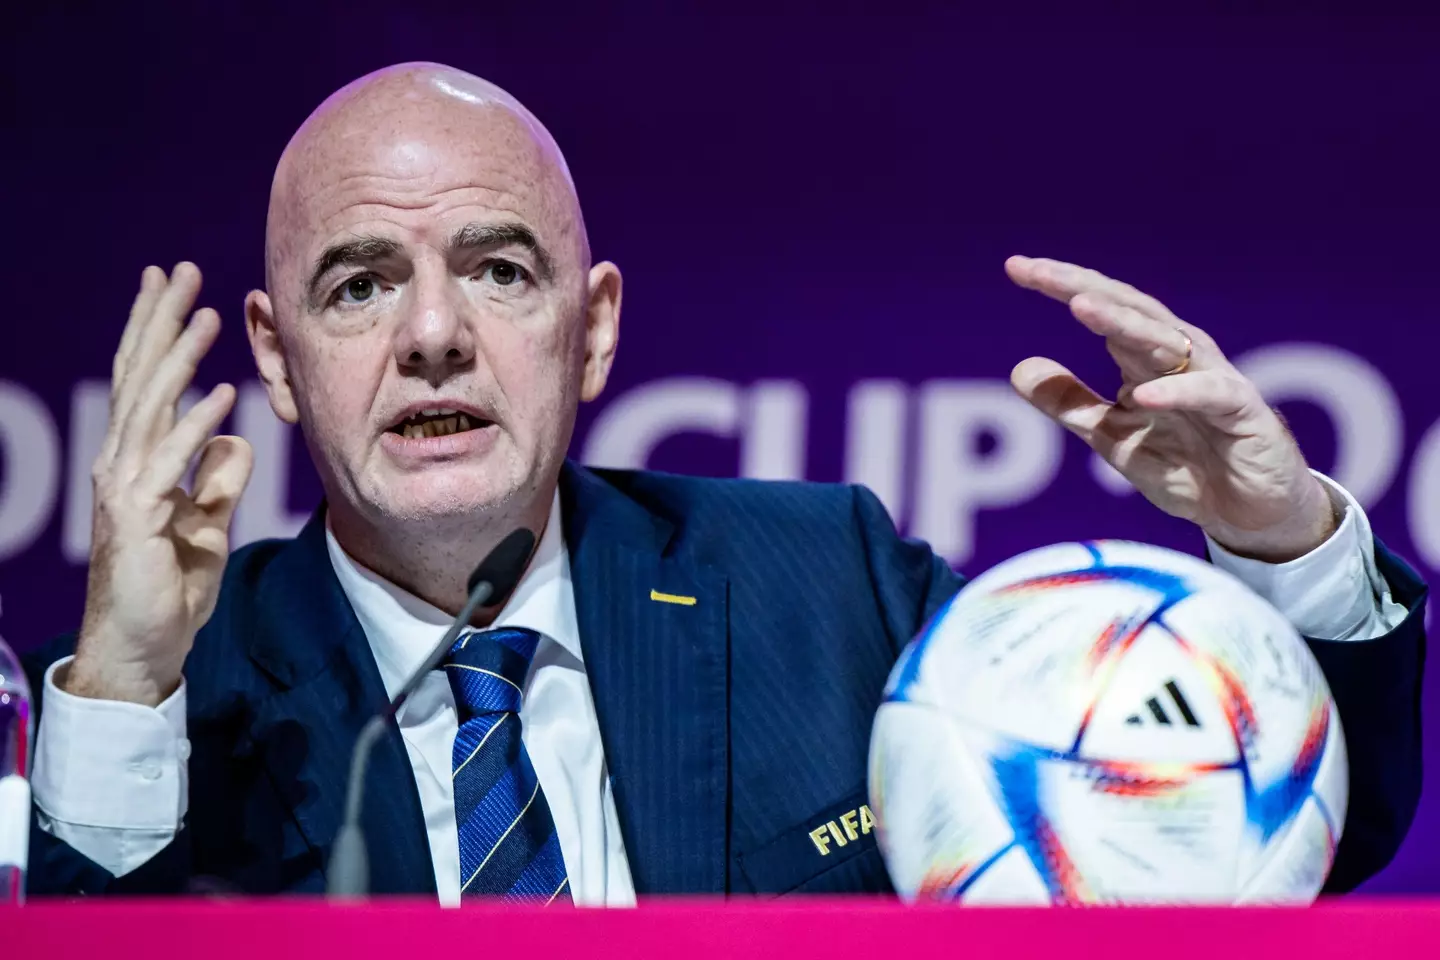 FIFA president Gianni Infantino hasn’t ruled out the possibility of North Korea hosting a World Cup in the future.